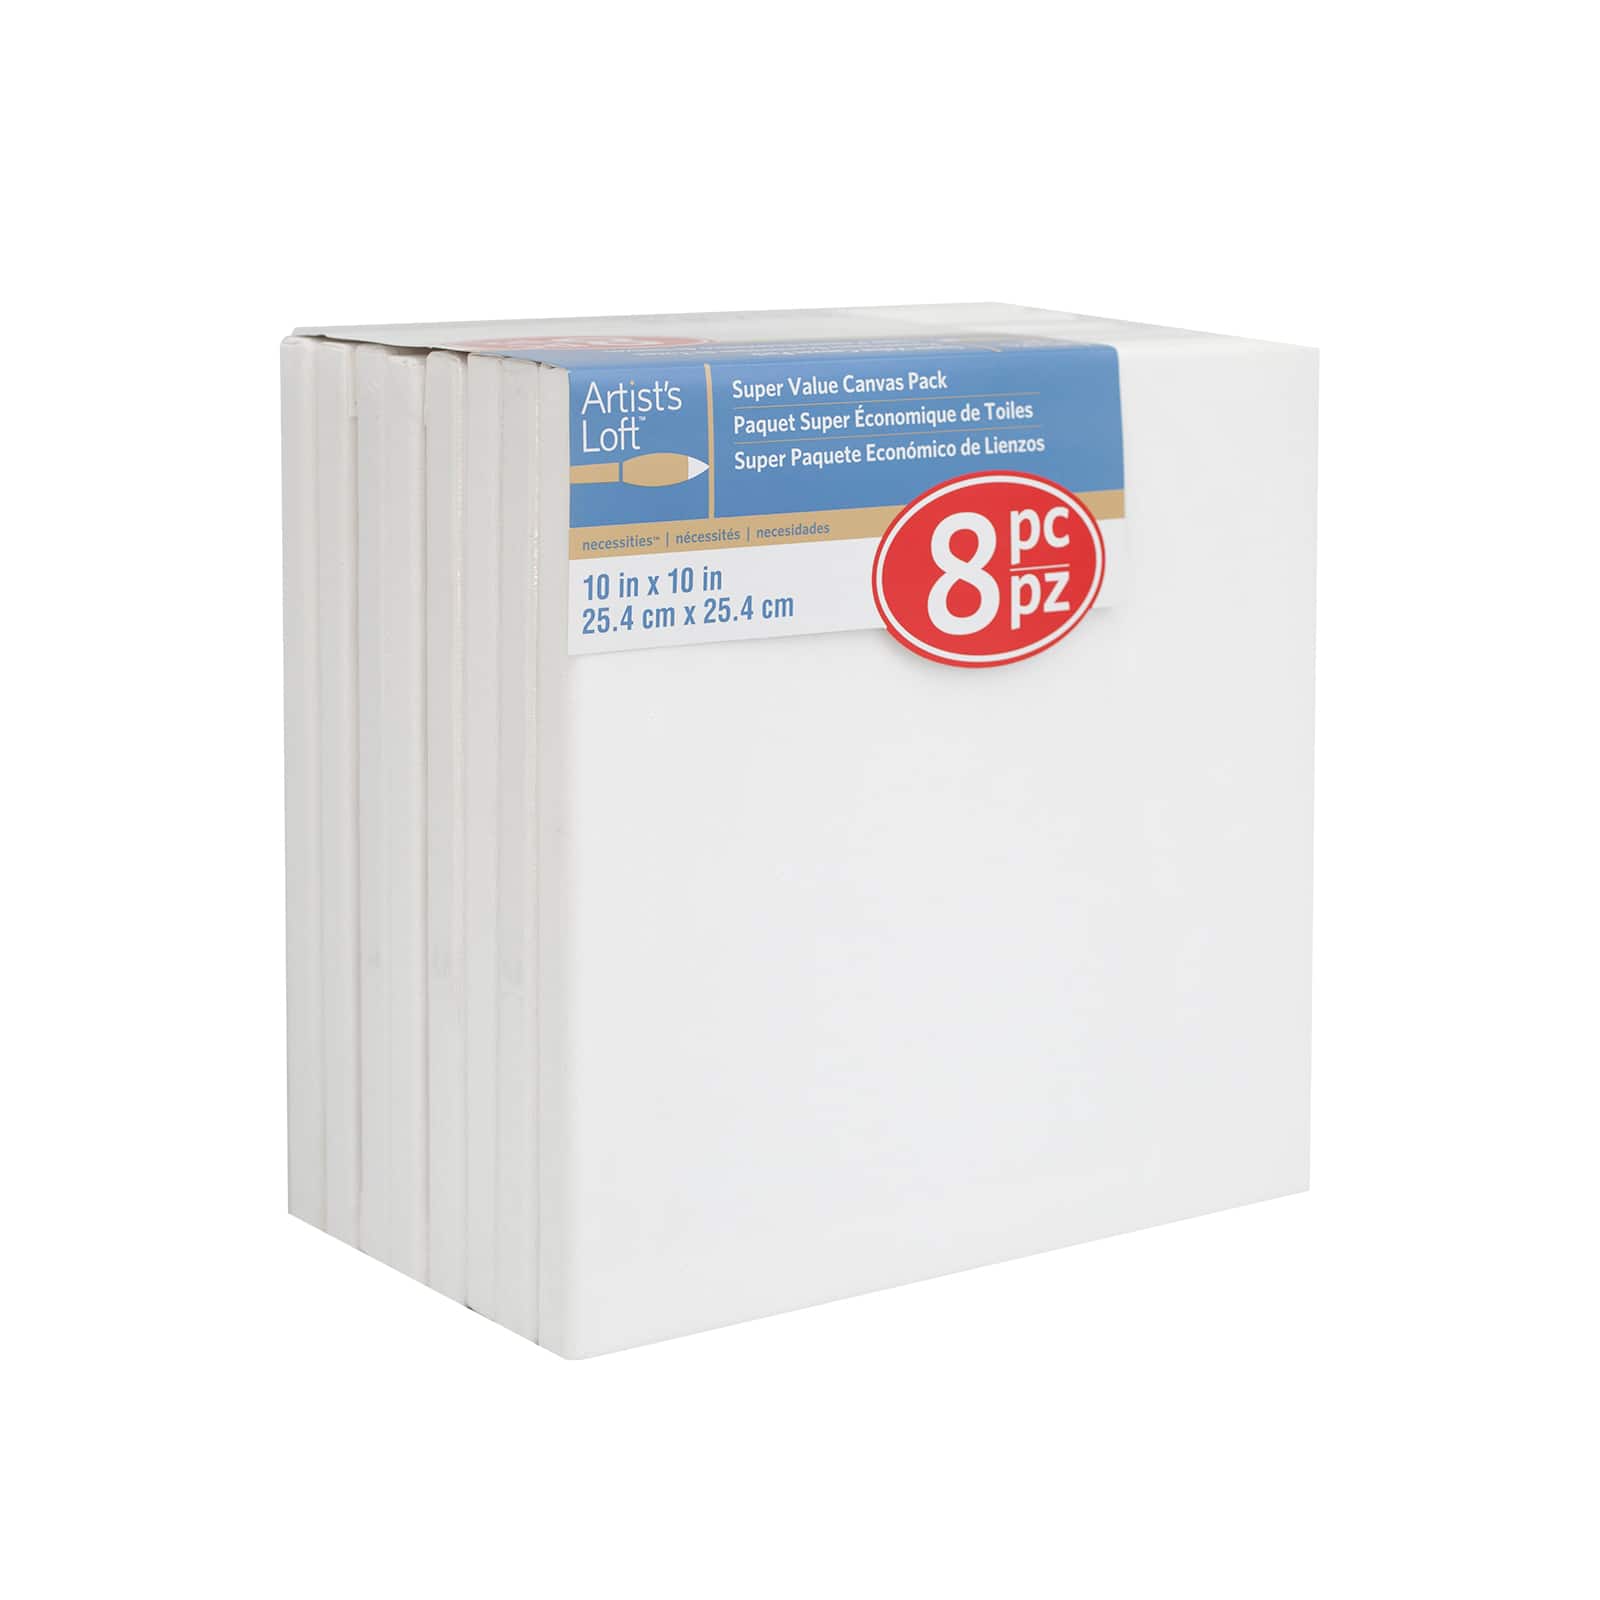 4 Packs: 8 ct. (32 total) 10 x 10 Super Value Canvas Pack by Artist's  Loft™ Necessities™ 